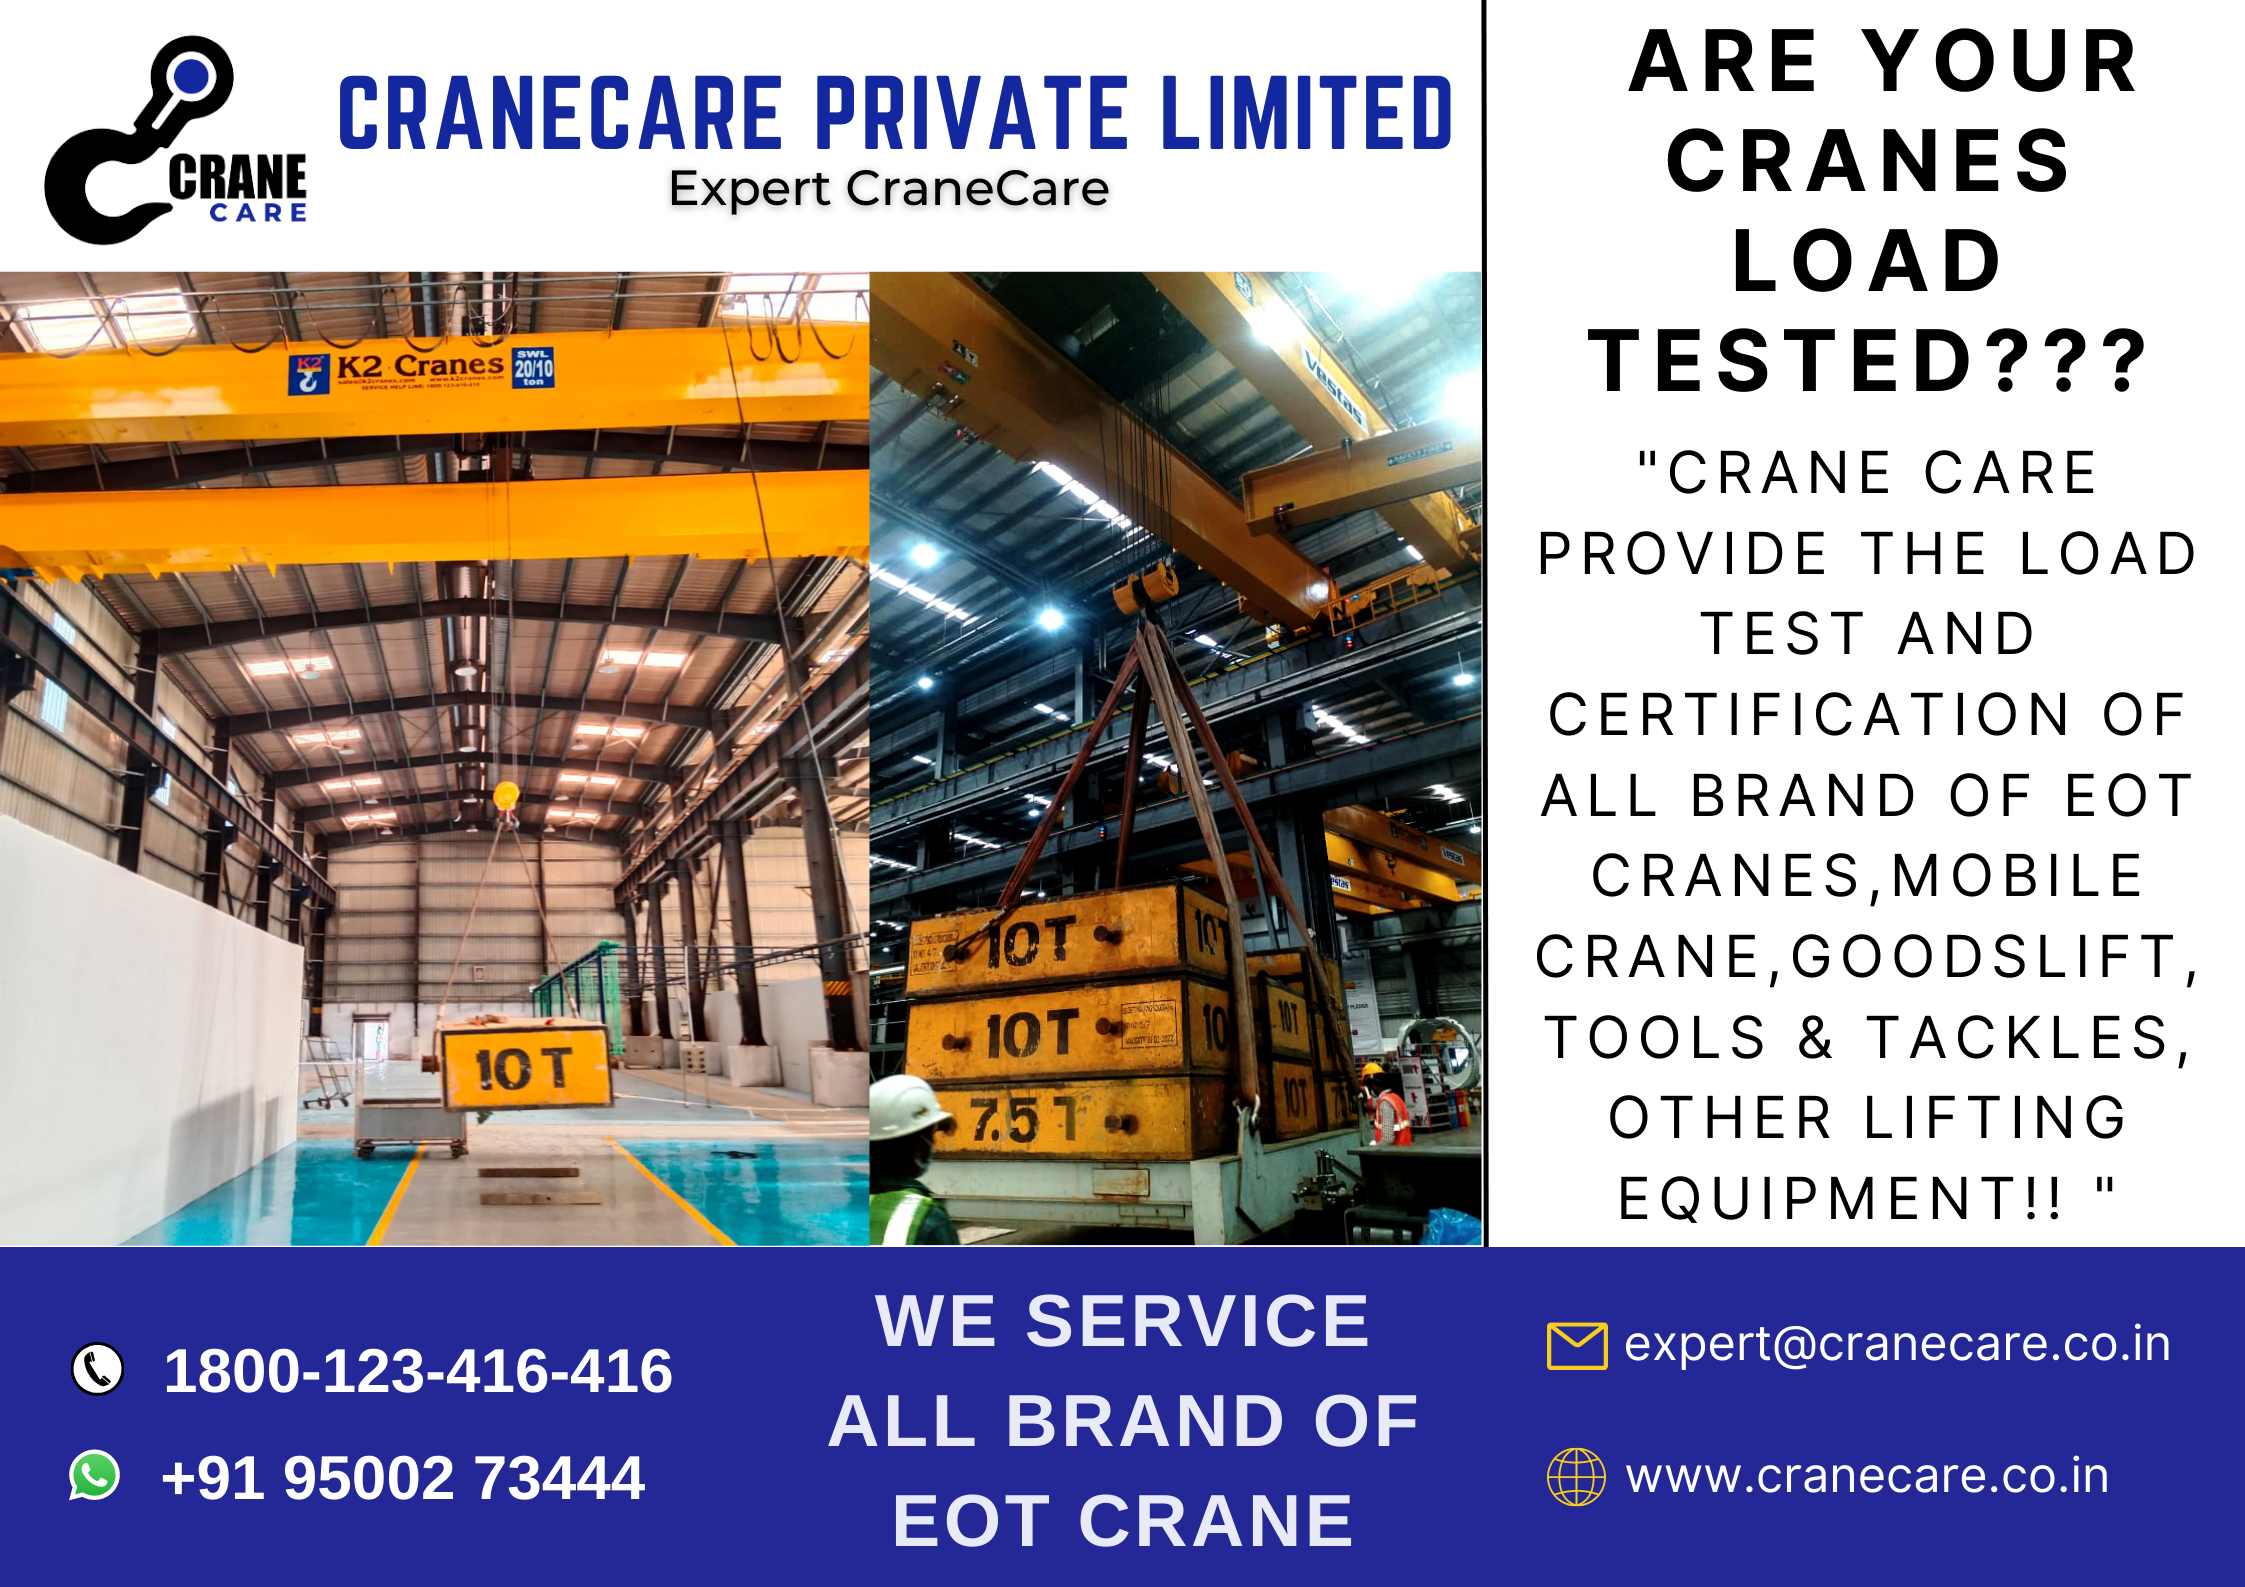 are your cranes load tested???